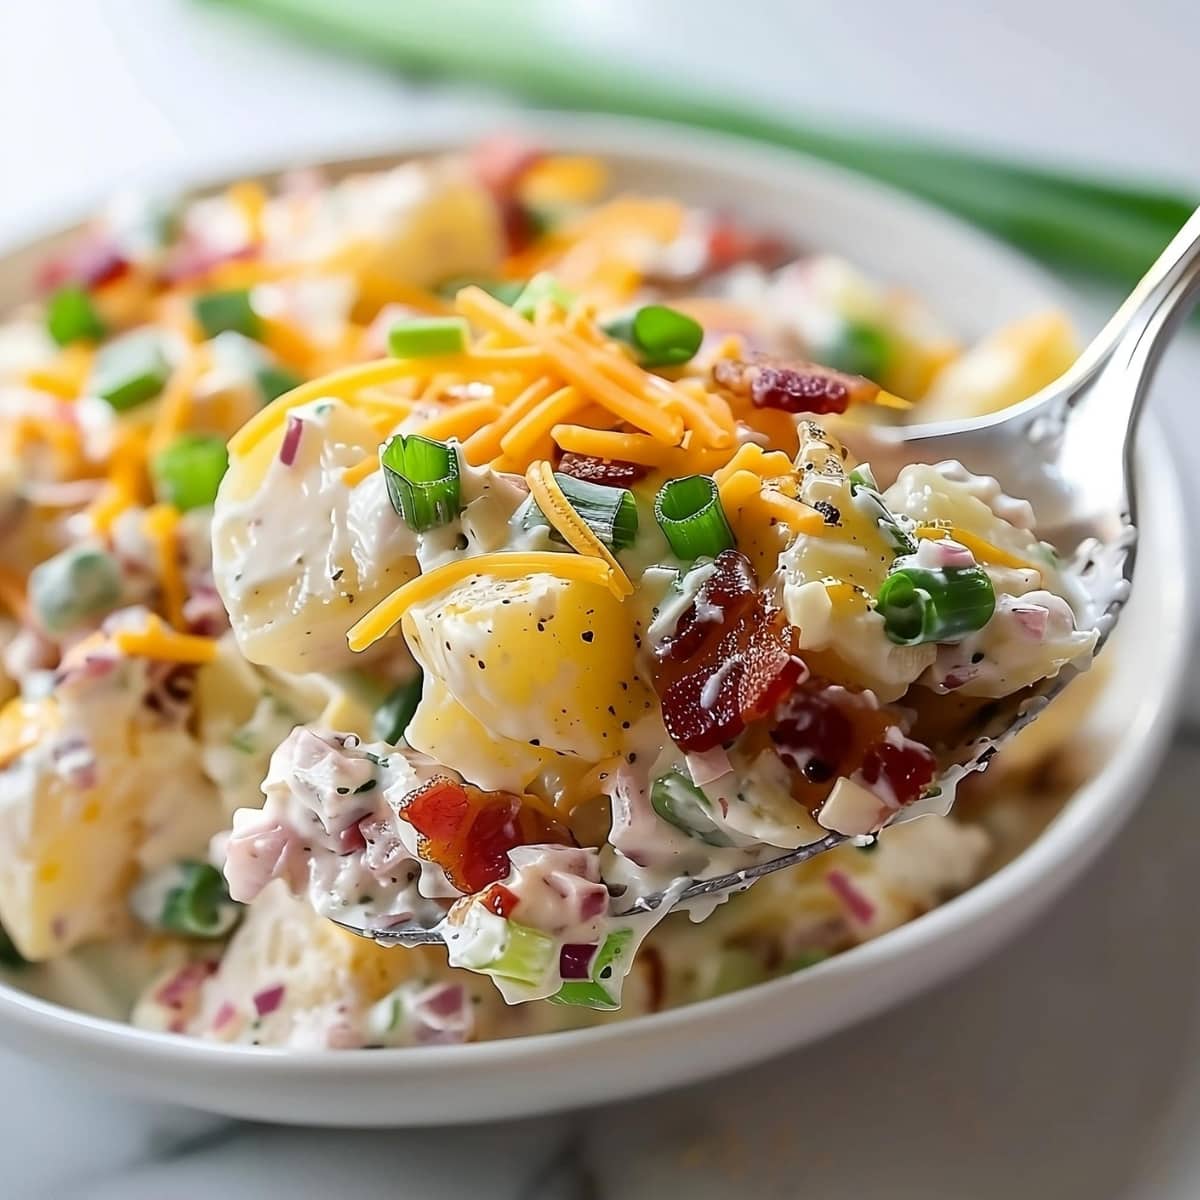 Spoonful of loaded baked potato salad with bacon, cheese and green onions.